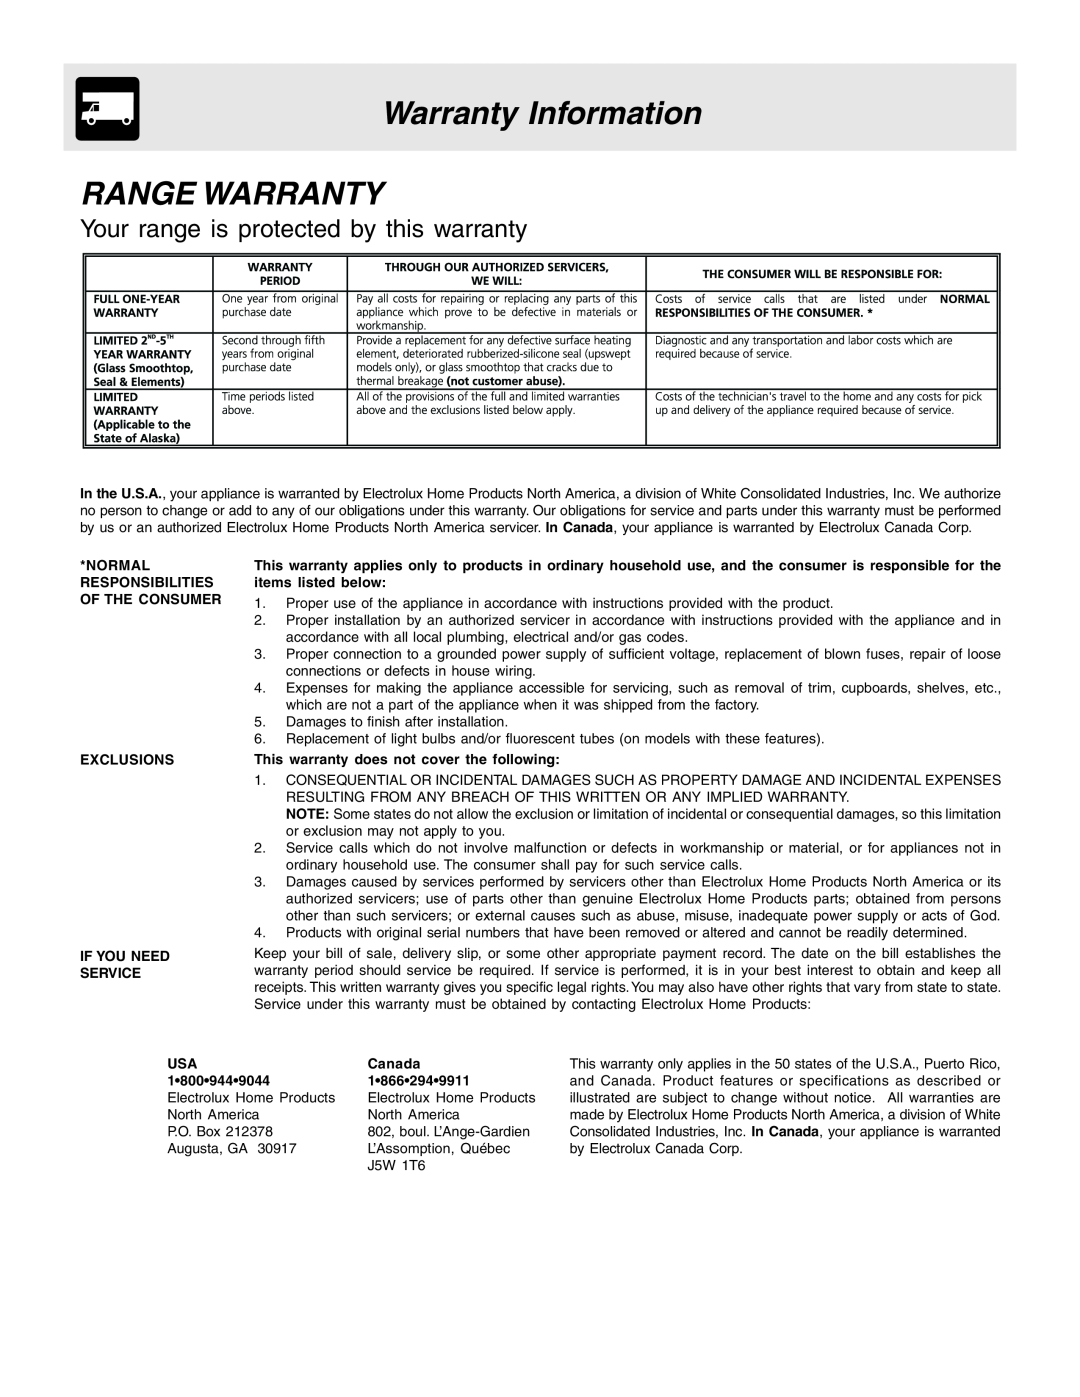 Frigidaire 318203860 Warranty Information, Range Warranty, Your range is protected by this warranty, Canada 